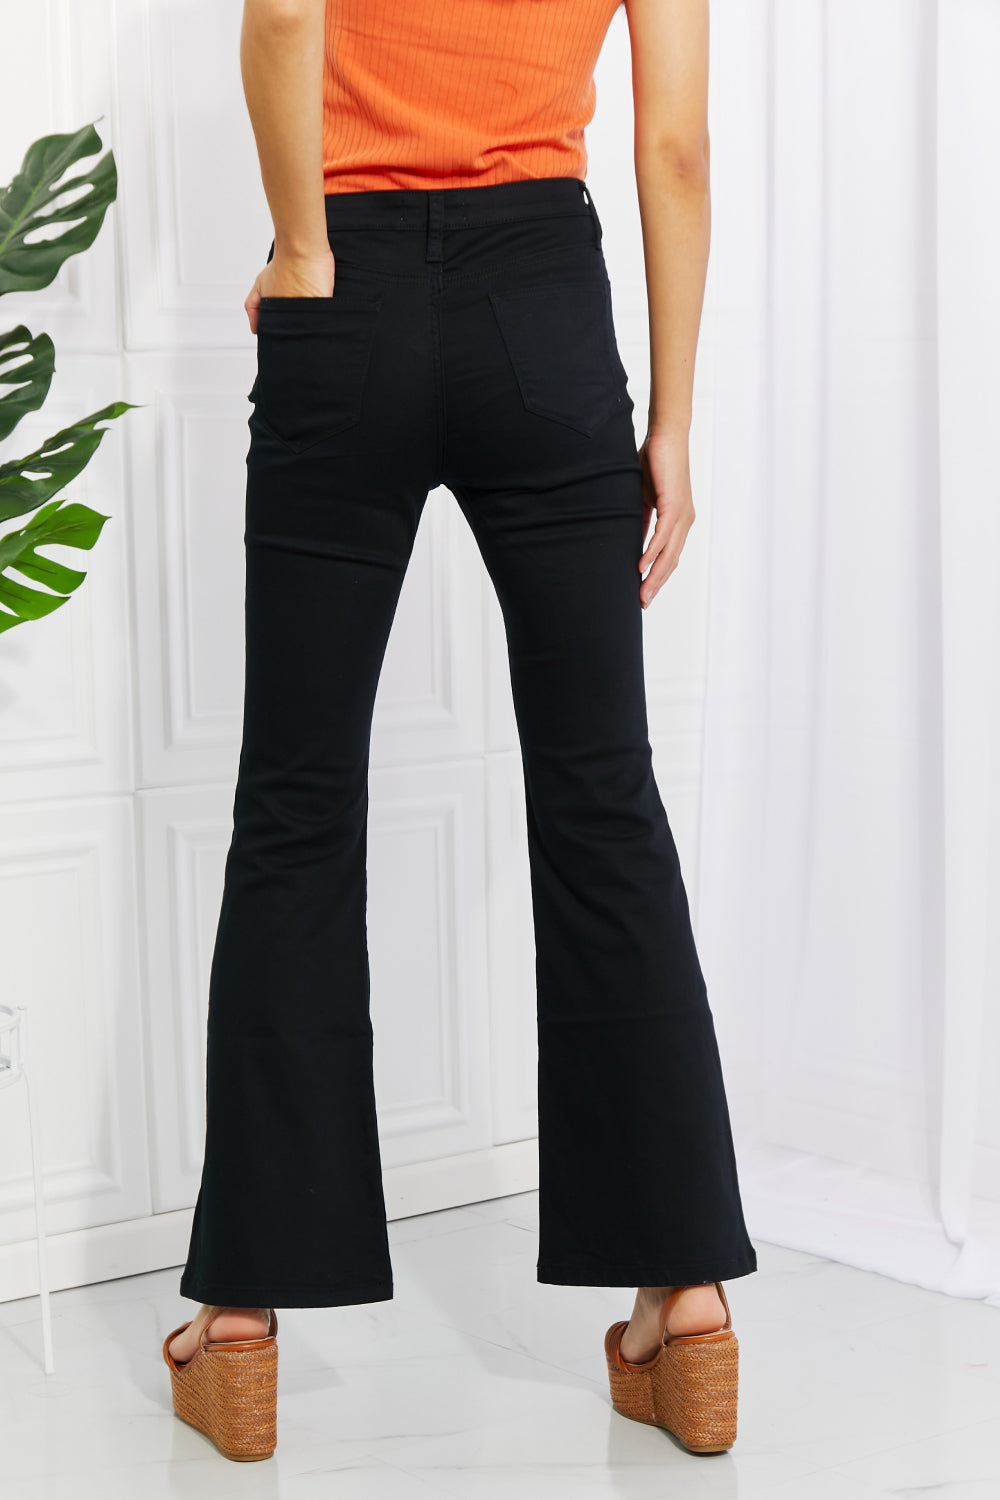 Zenana Clementine Full Size High-Rise Bootcut Pants in Black